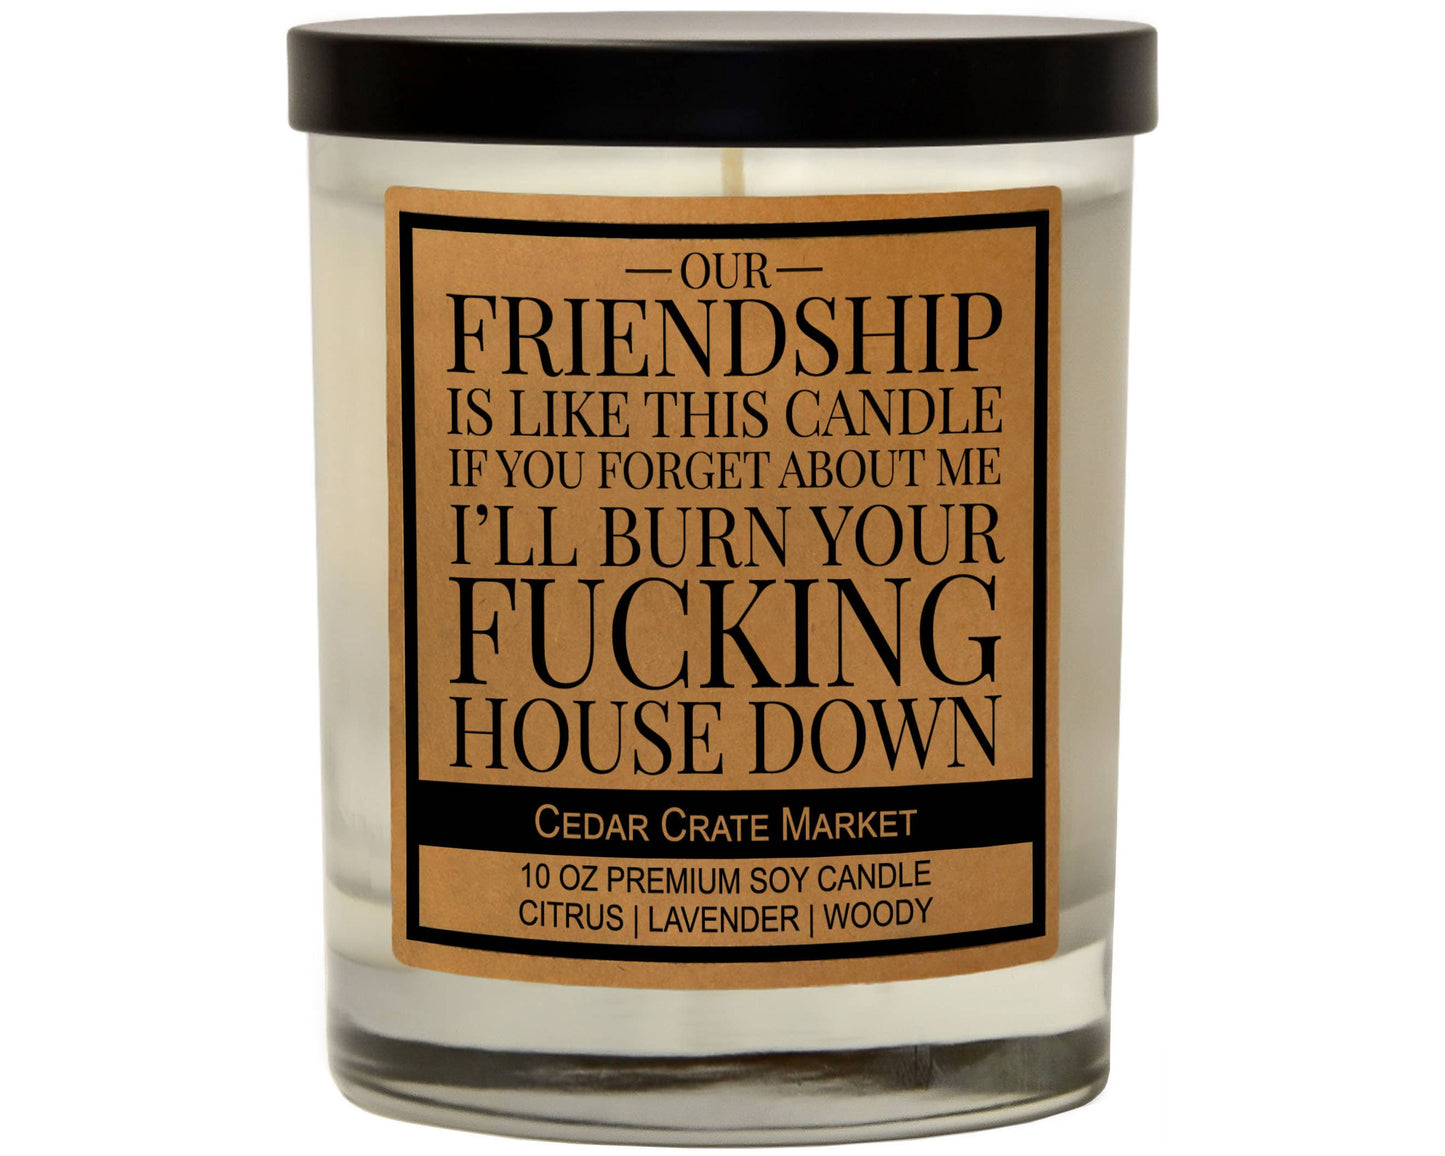 Our Friendship is Like This Candle Soy Candle